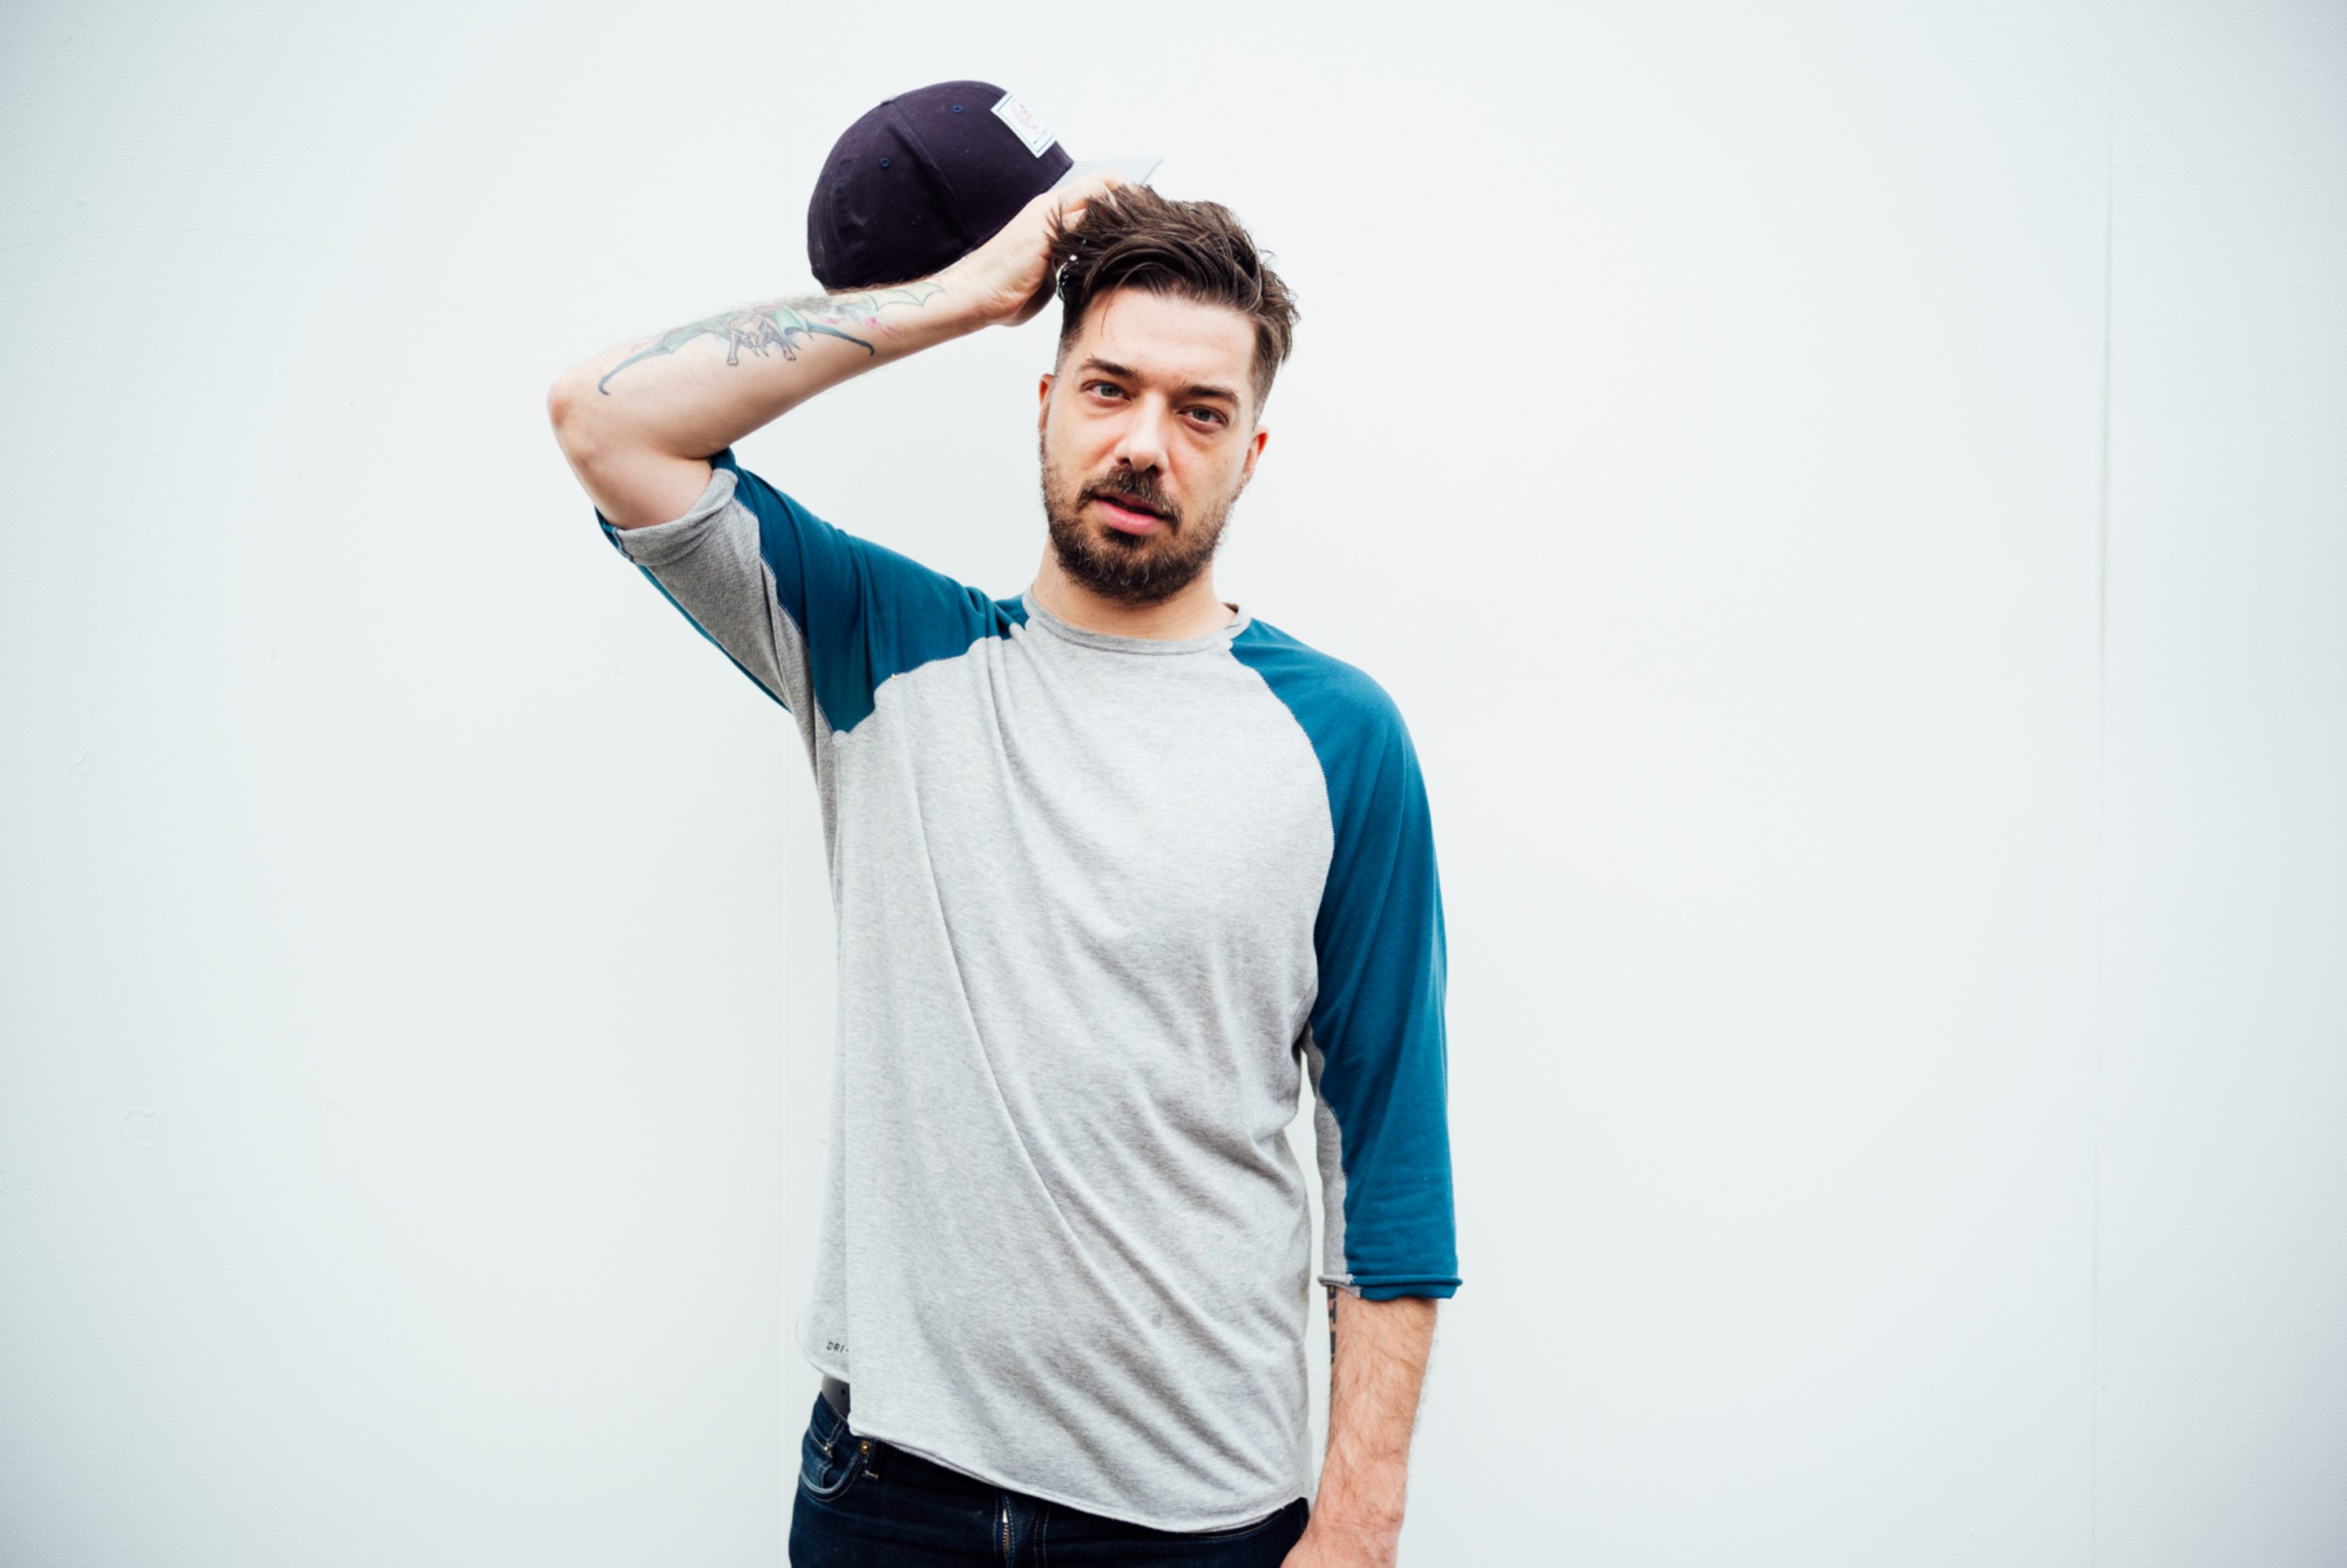 Aesop Rock High Quality Background on Wallpapers Vista